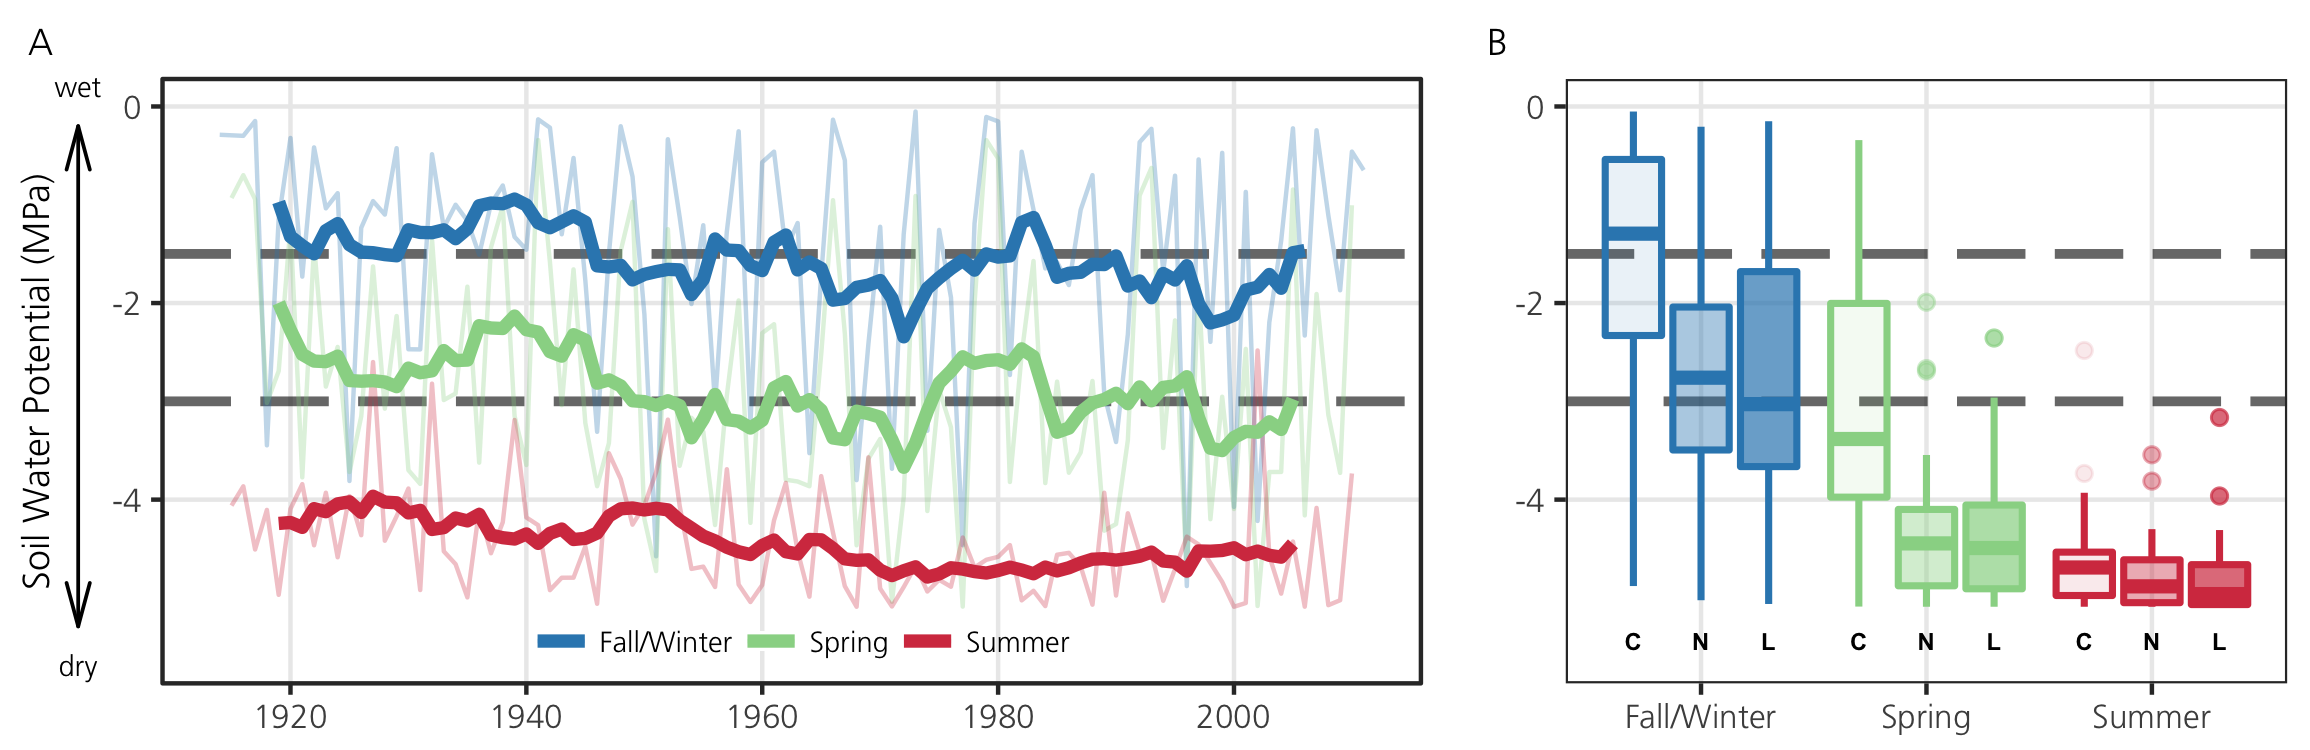 Figure 3. Left panel is a line plot showing soil moisture through time with a line for each season. Right panel contains boxplots showing how seasonal moisture is predicted to change from the current levels to the near term and long term future.